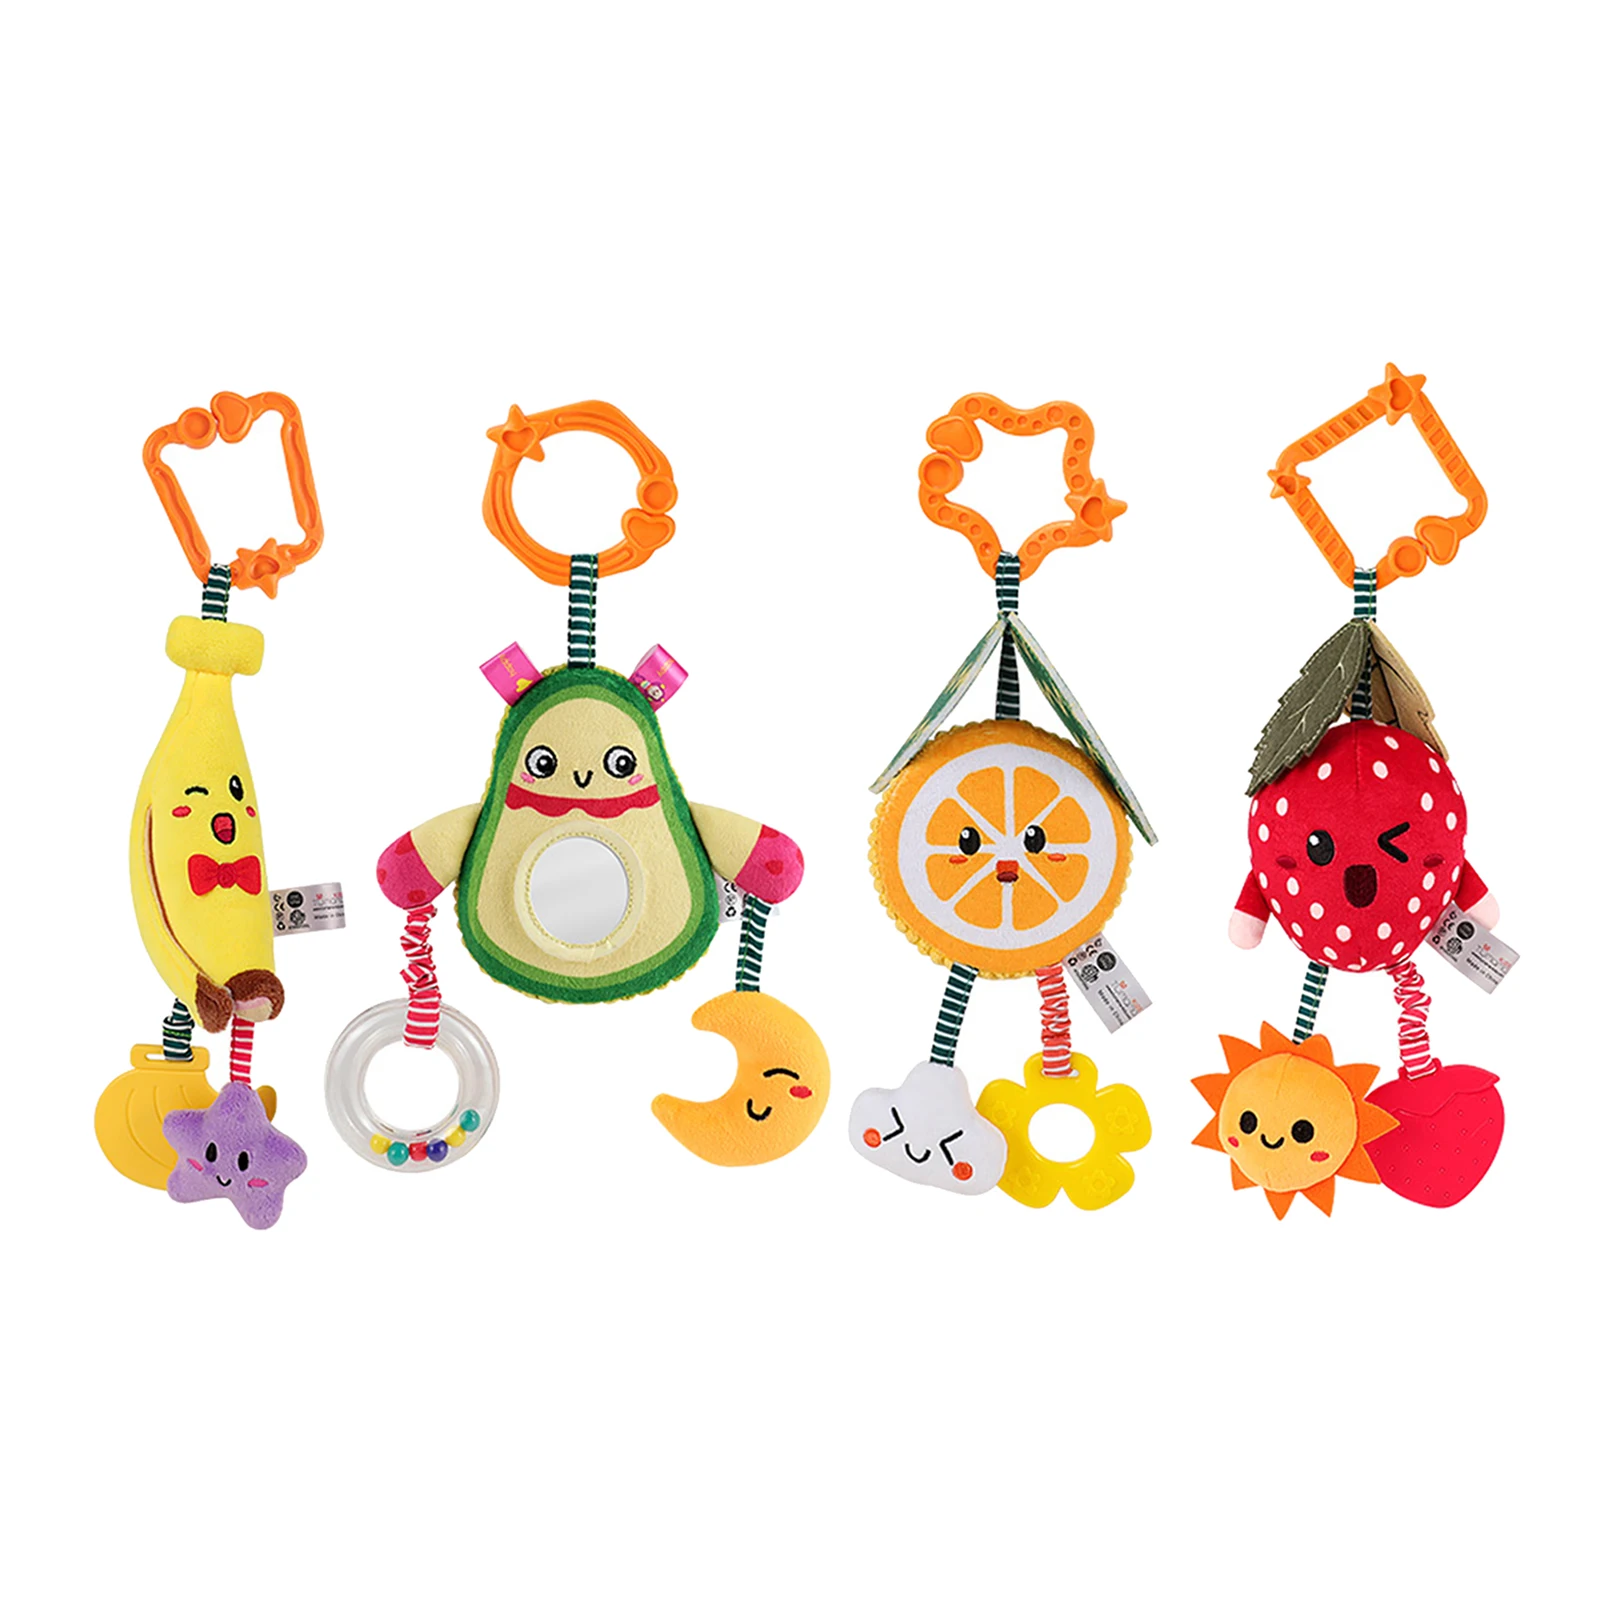 

Baby Rattle Teether Stroller Crib Hanging Rattles Toys for 0-12 Months Babies gift